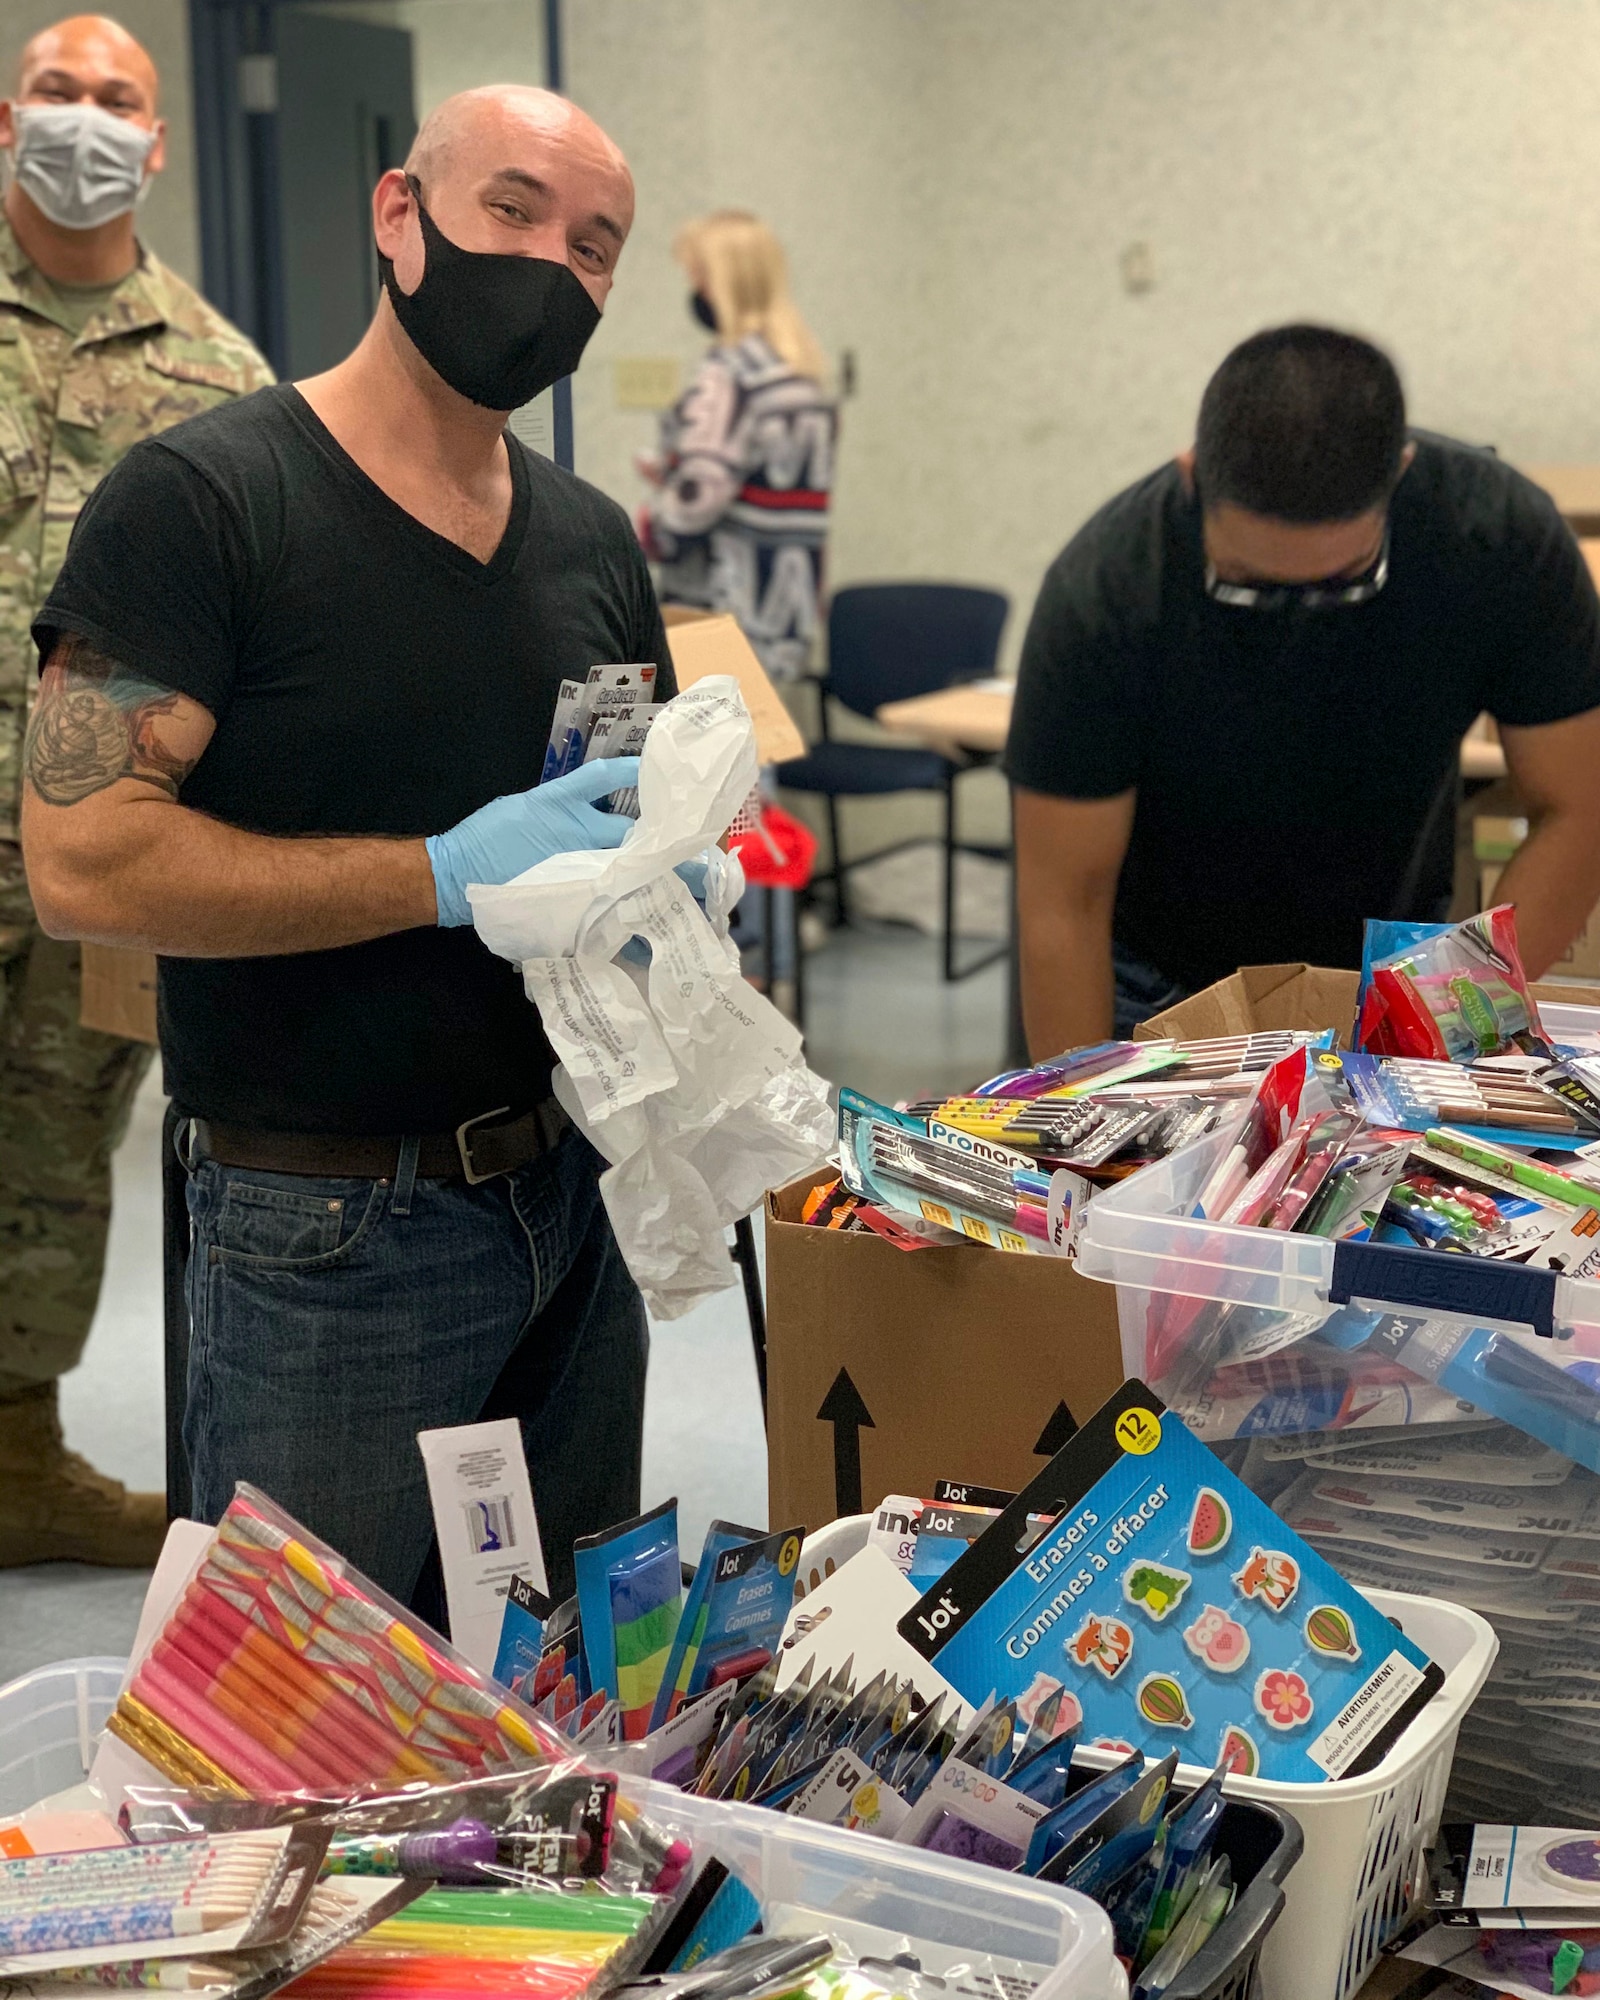 The 144th Fighter Wing’s Airman and Family Readiness hosted its annual School Supply Giveaway for military families. Student flight members and volunteers from the Airmen and Family Readiness Office helped to set up the supplies.